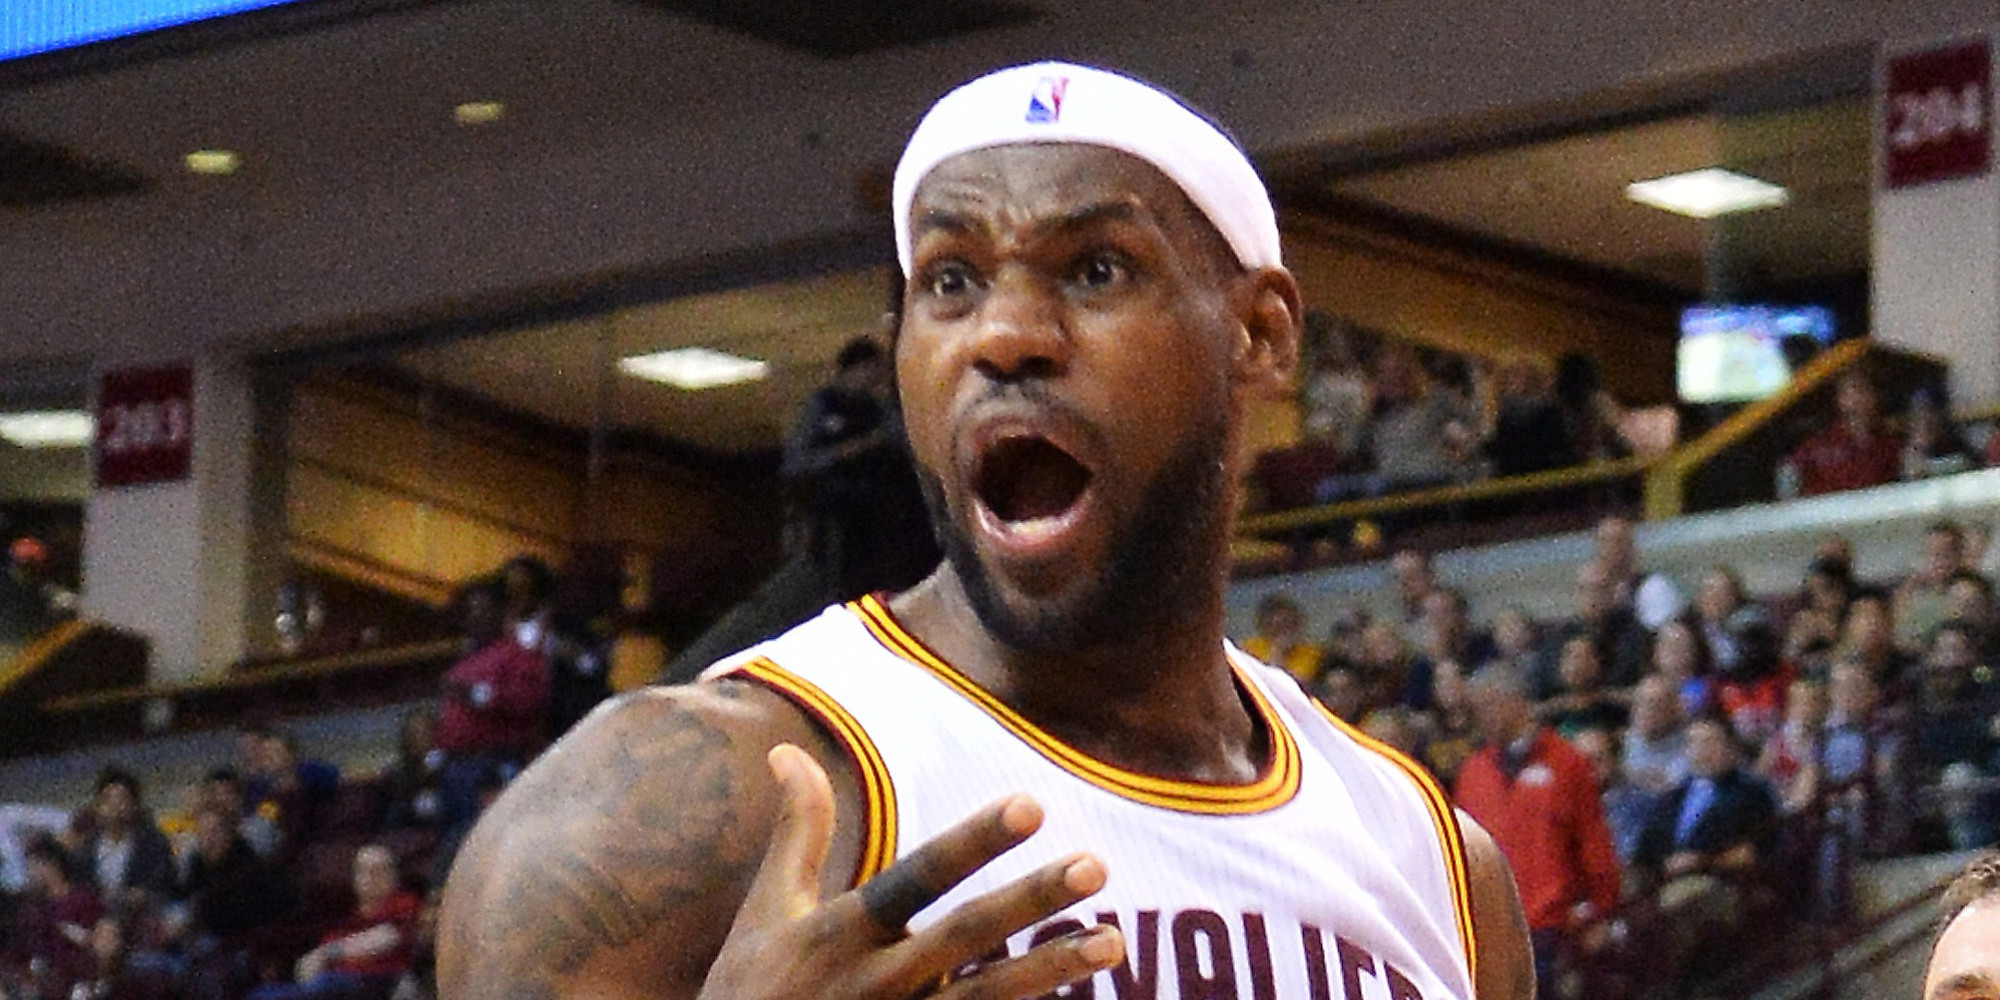 These 5 NBA Players Have Higher Salaries Than LeBron This Season